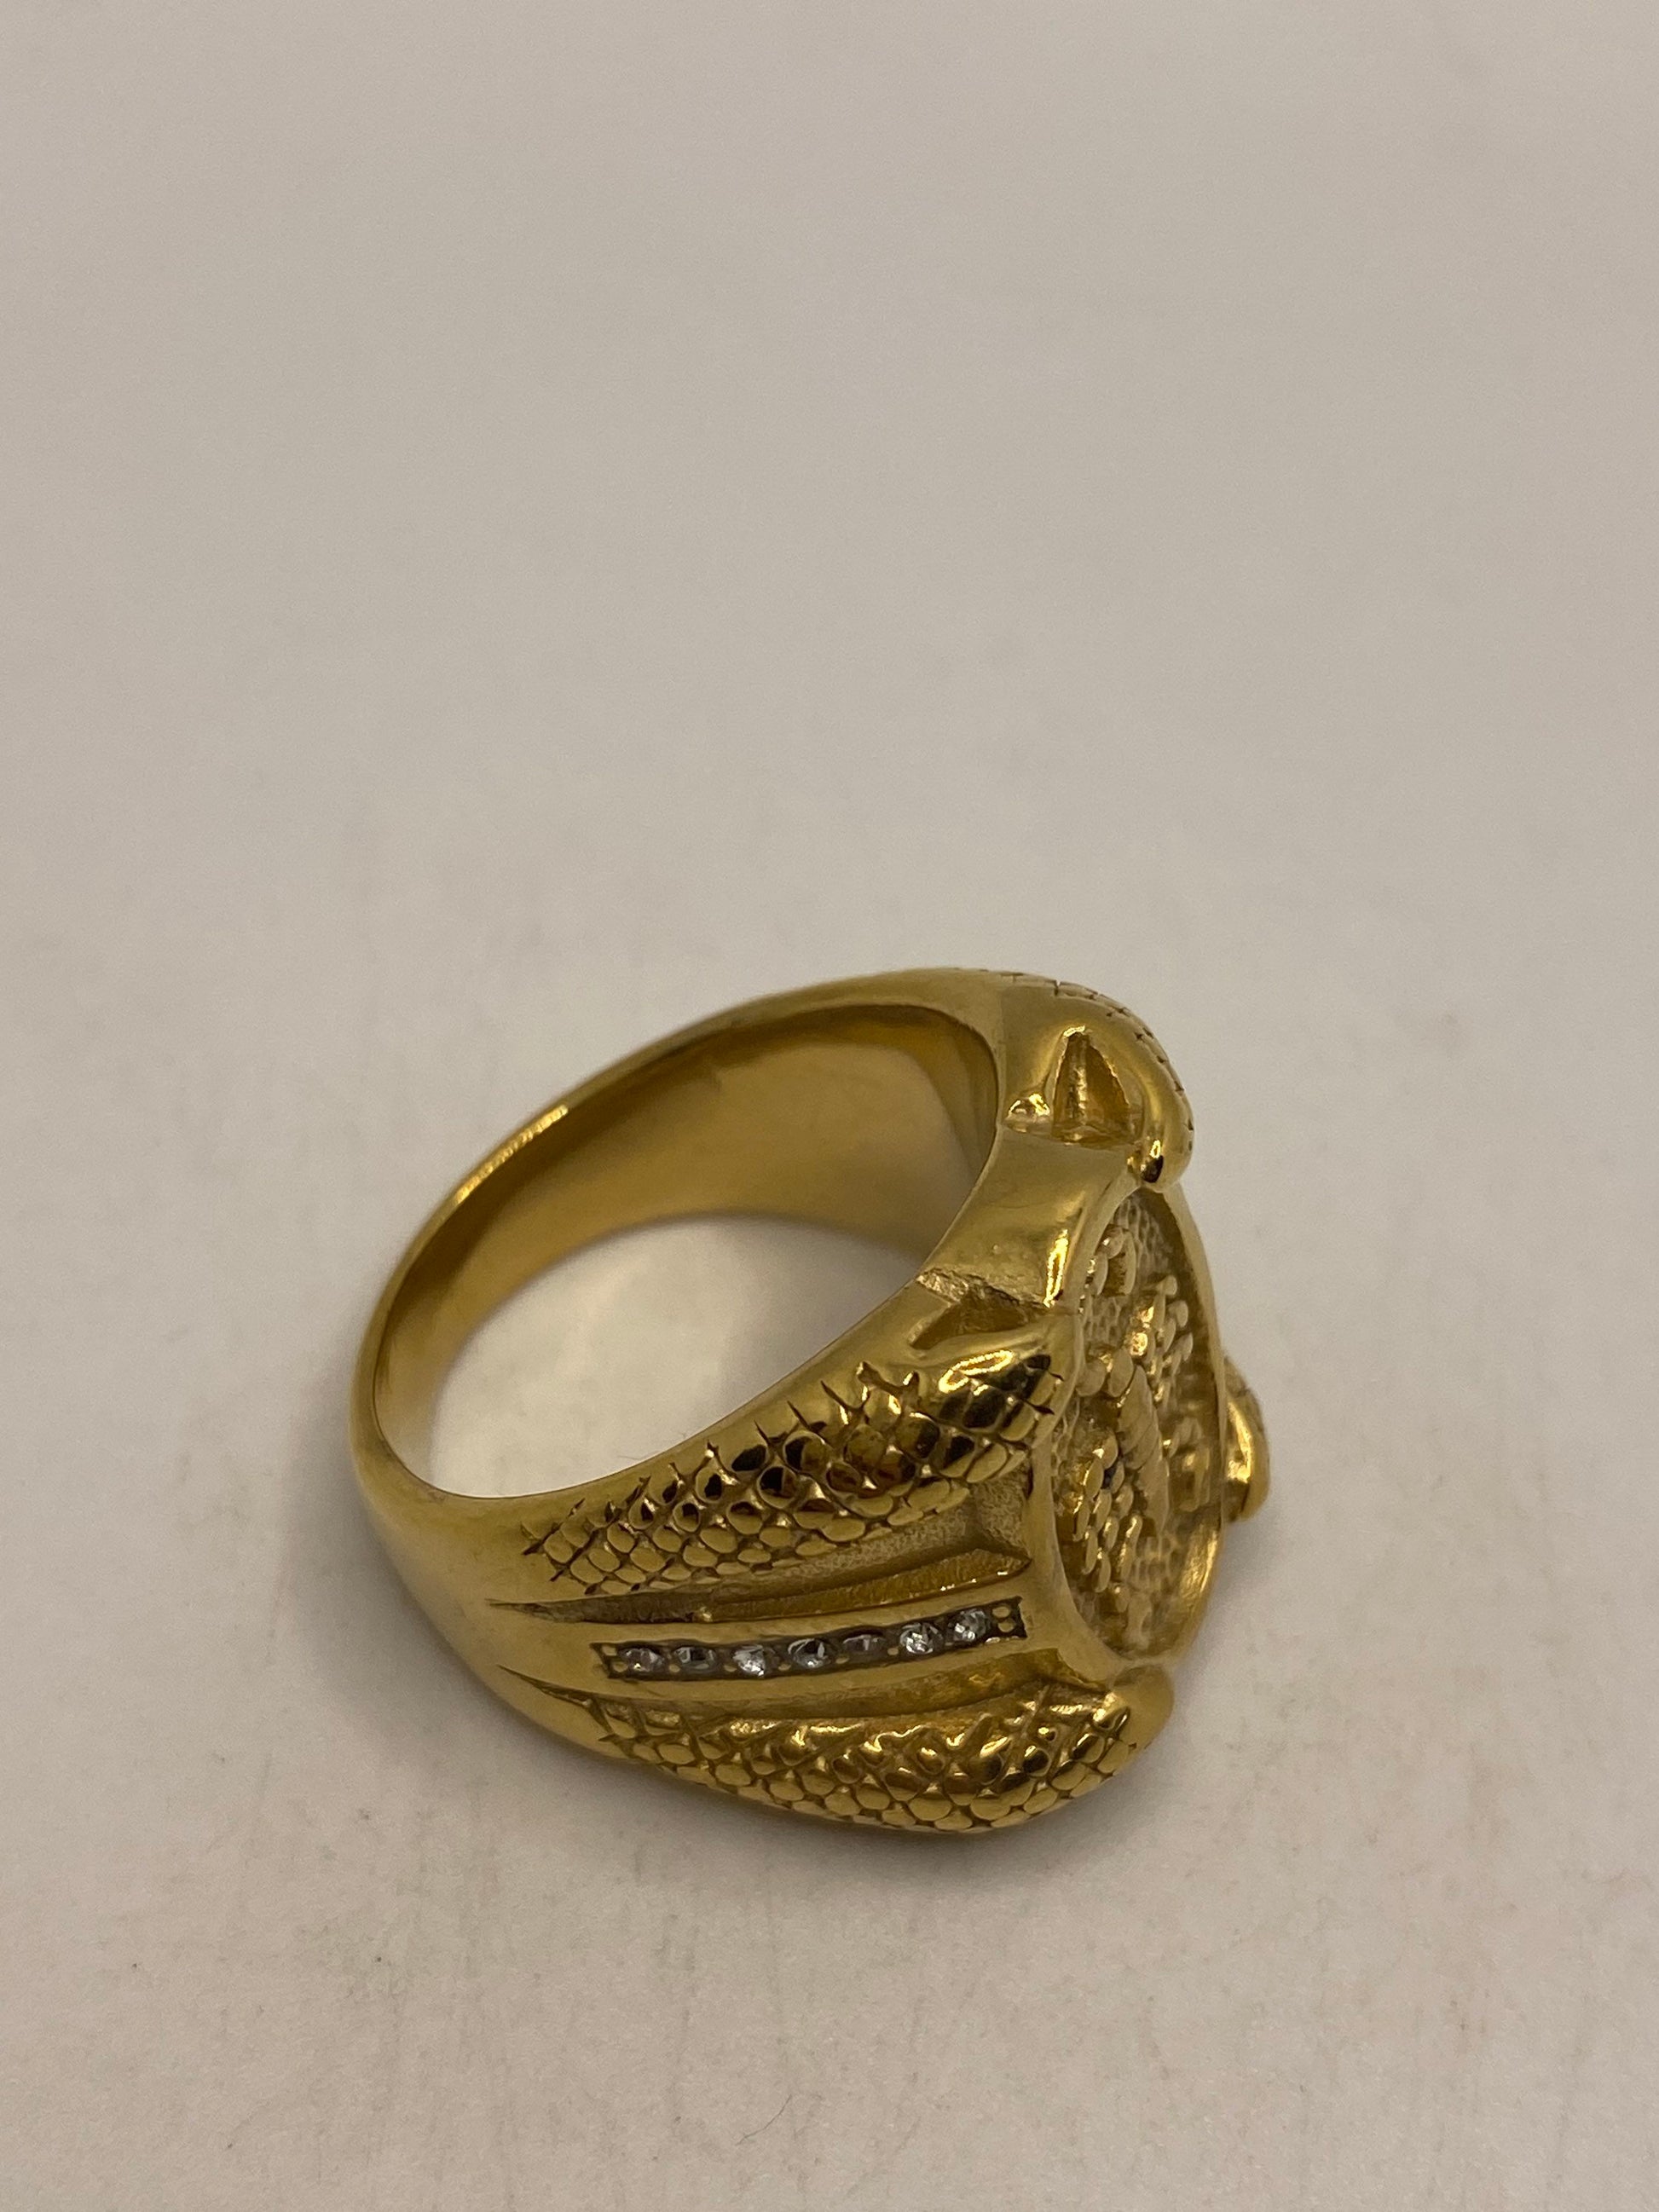 Vintage Yellow Gold Scorpion Stainless Steel Ring Size 10